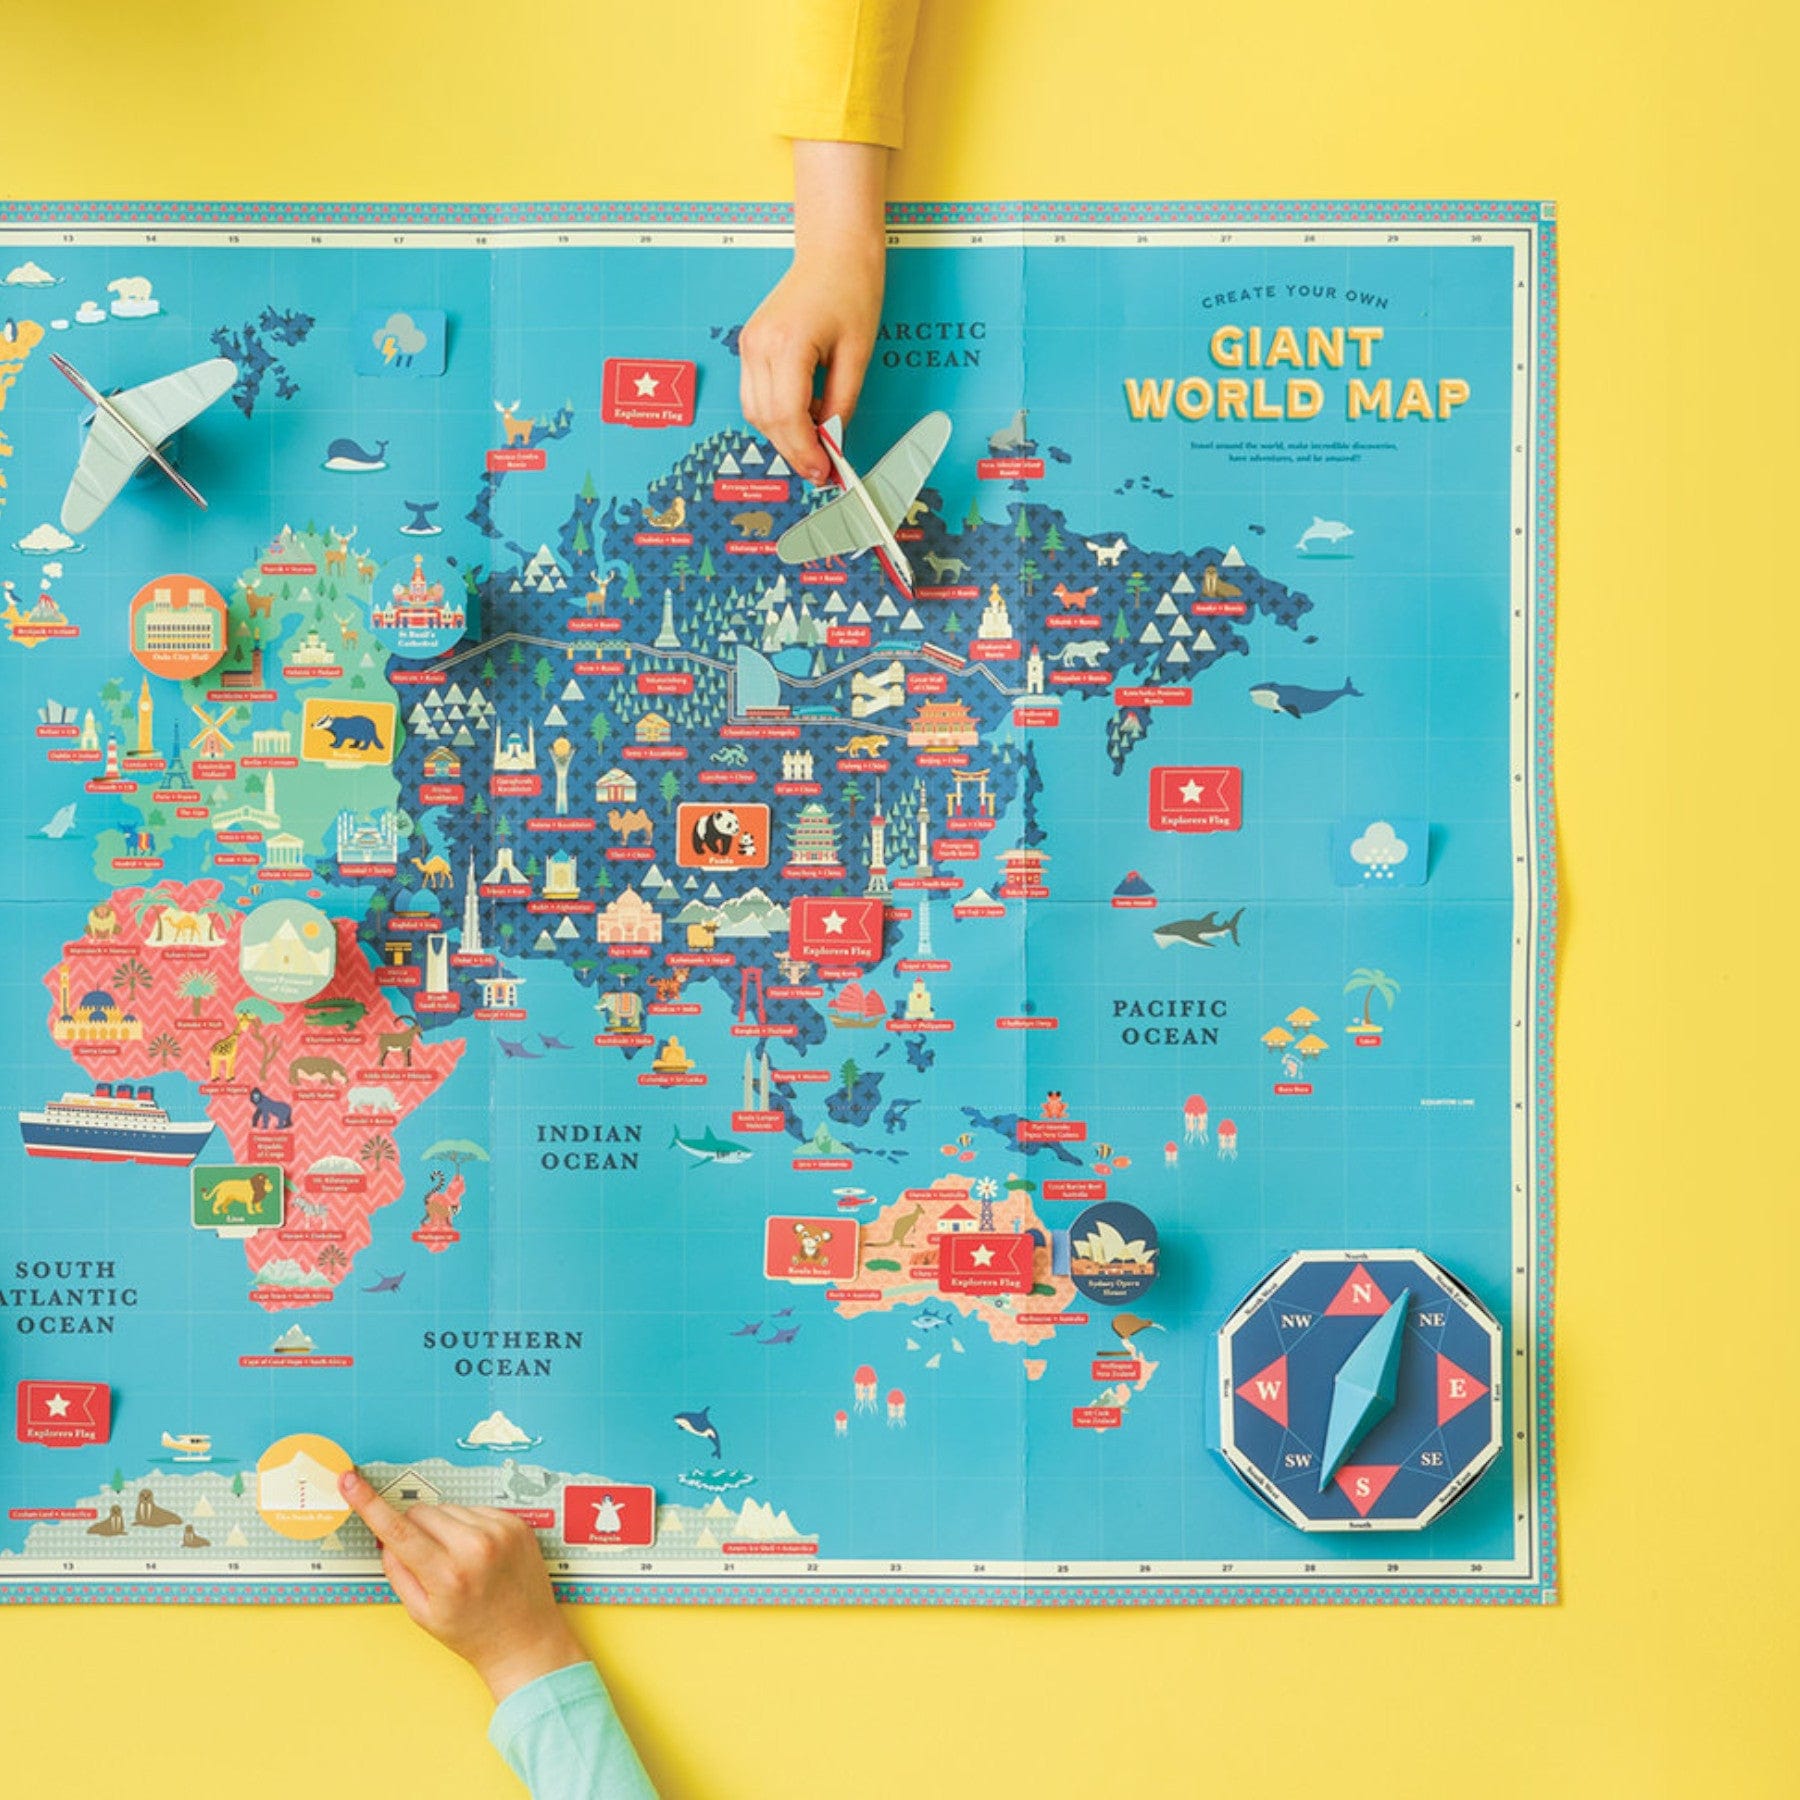 Create your own giant world map